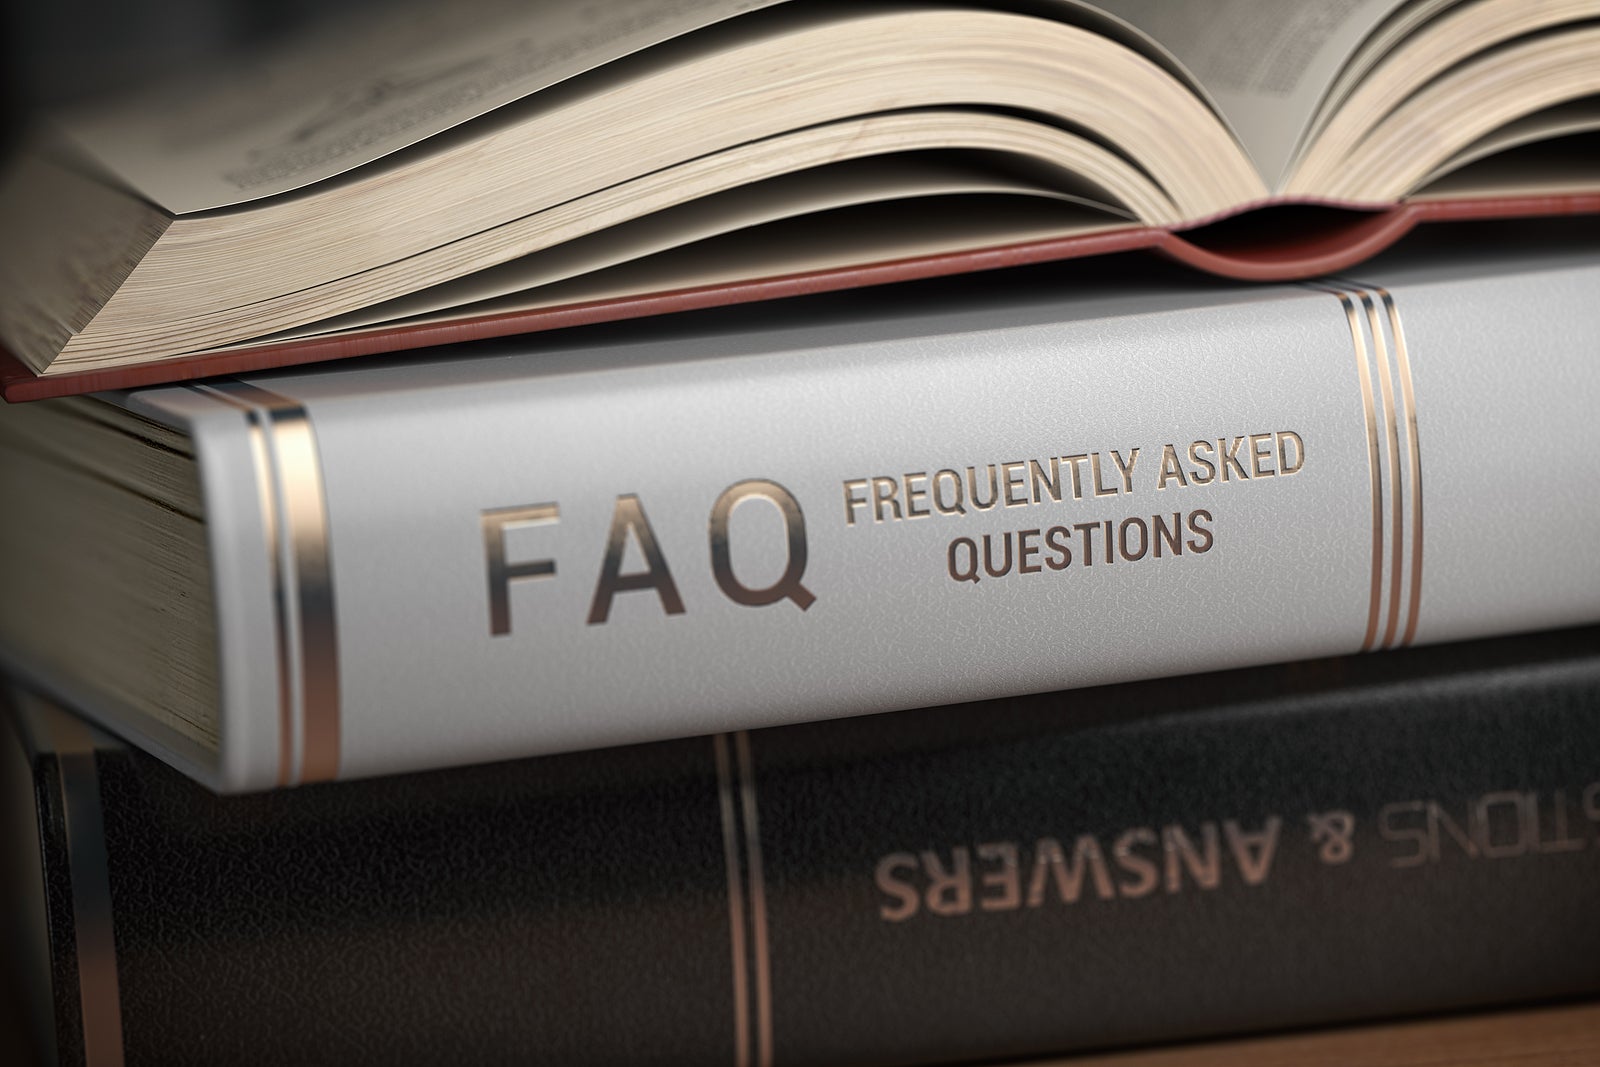 FAQ Frequently asked questions concept. Books with FAQ on the cover. 3d illustration